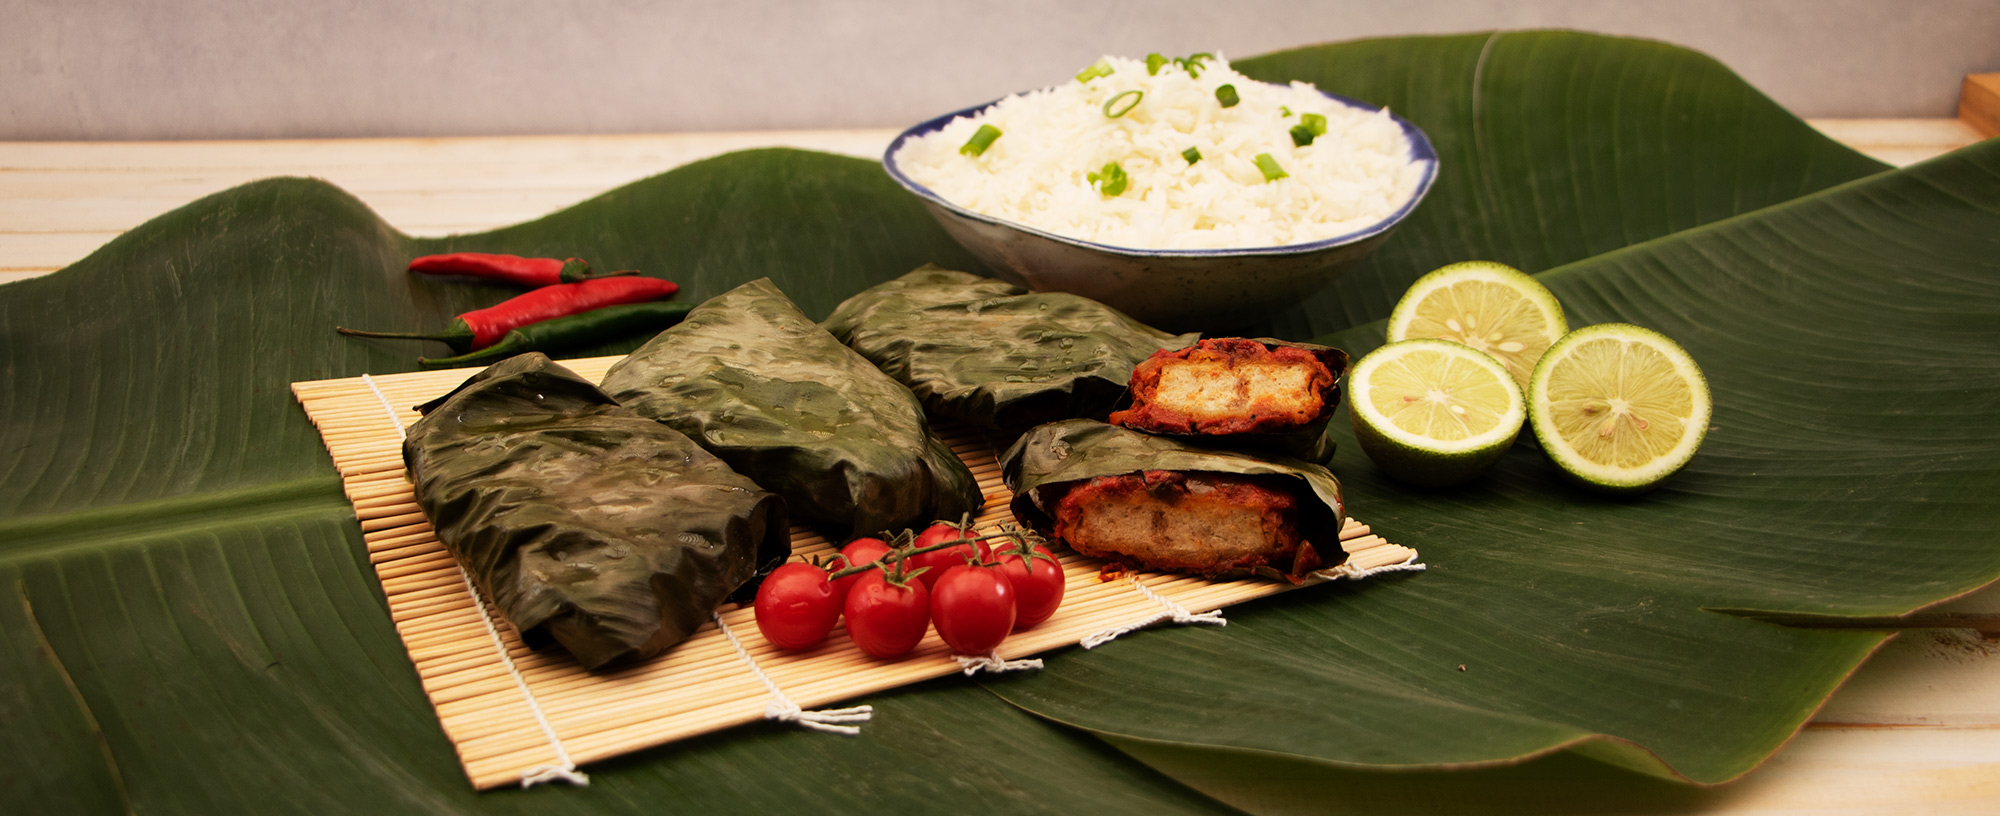 Fish-style fillets in banana leaves